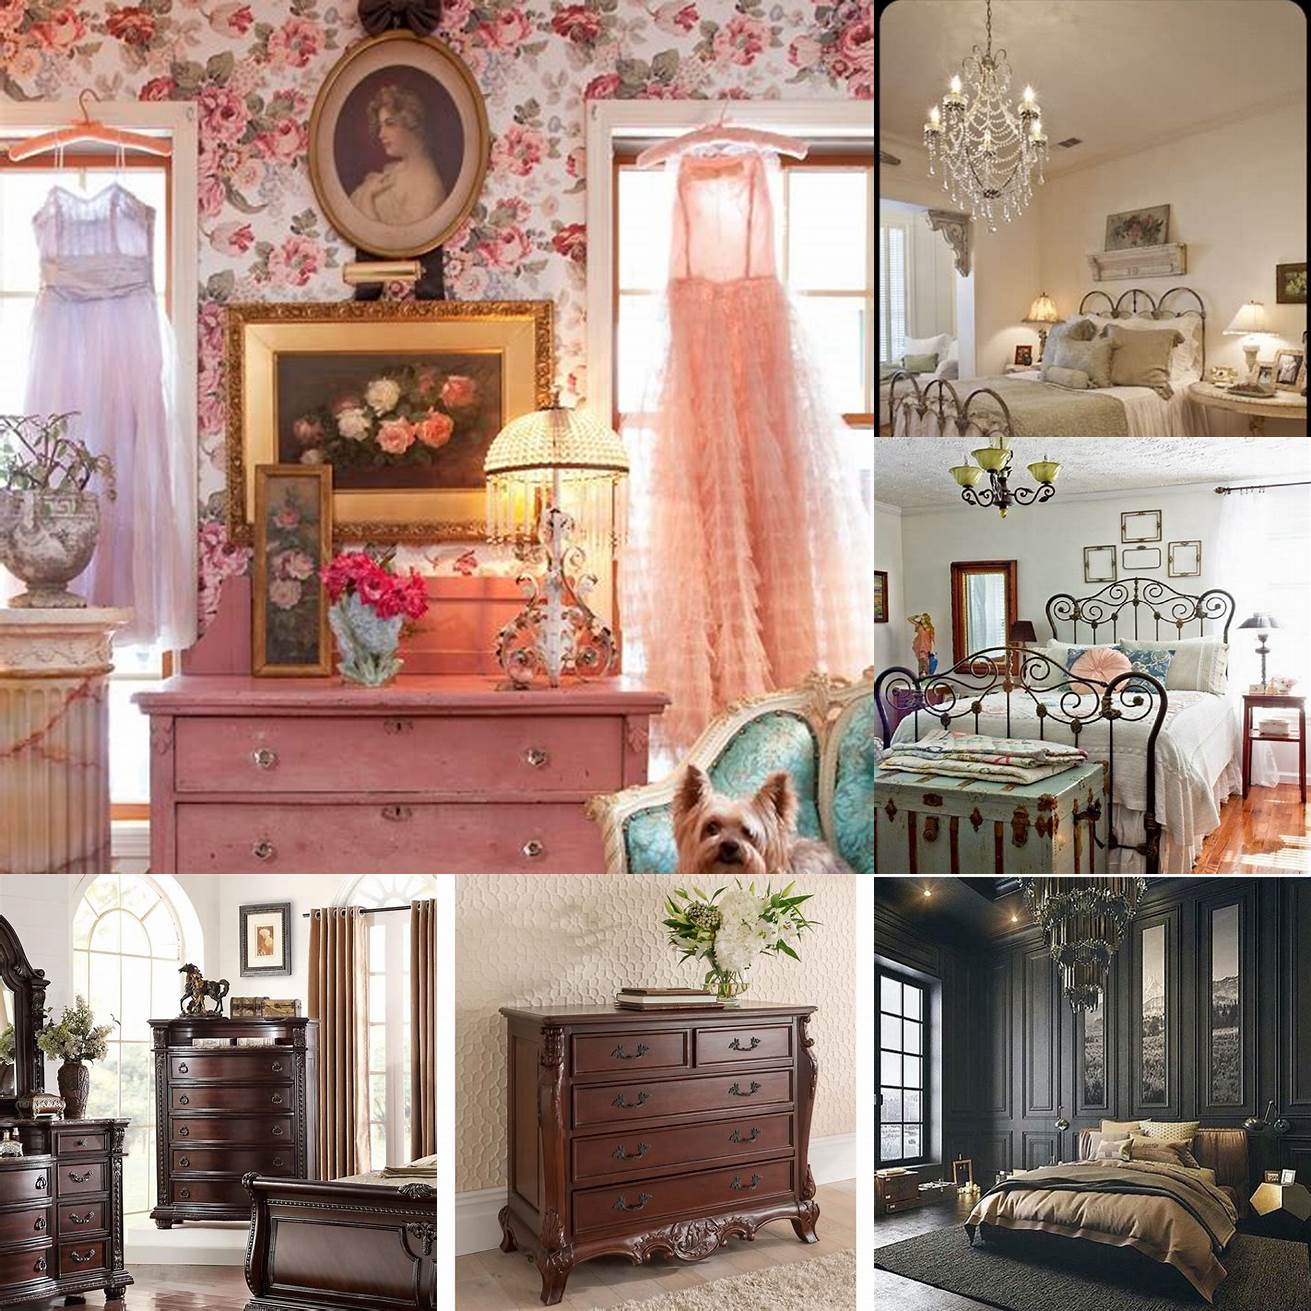 A vintage bedroom chest adds character and personality to your space